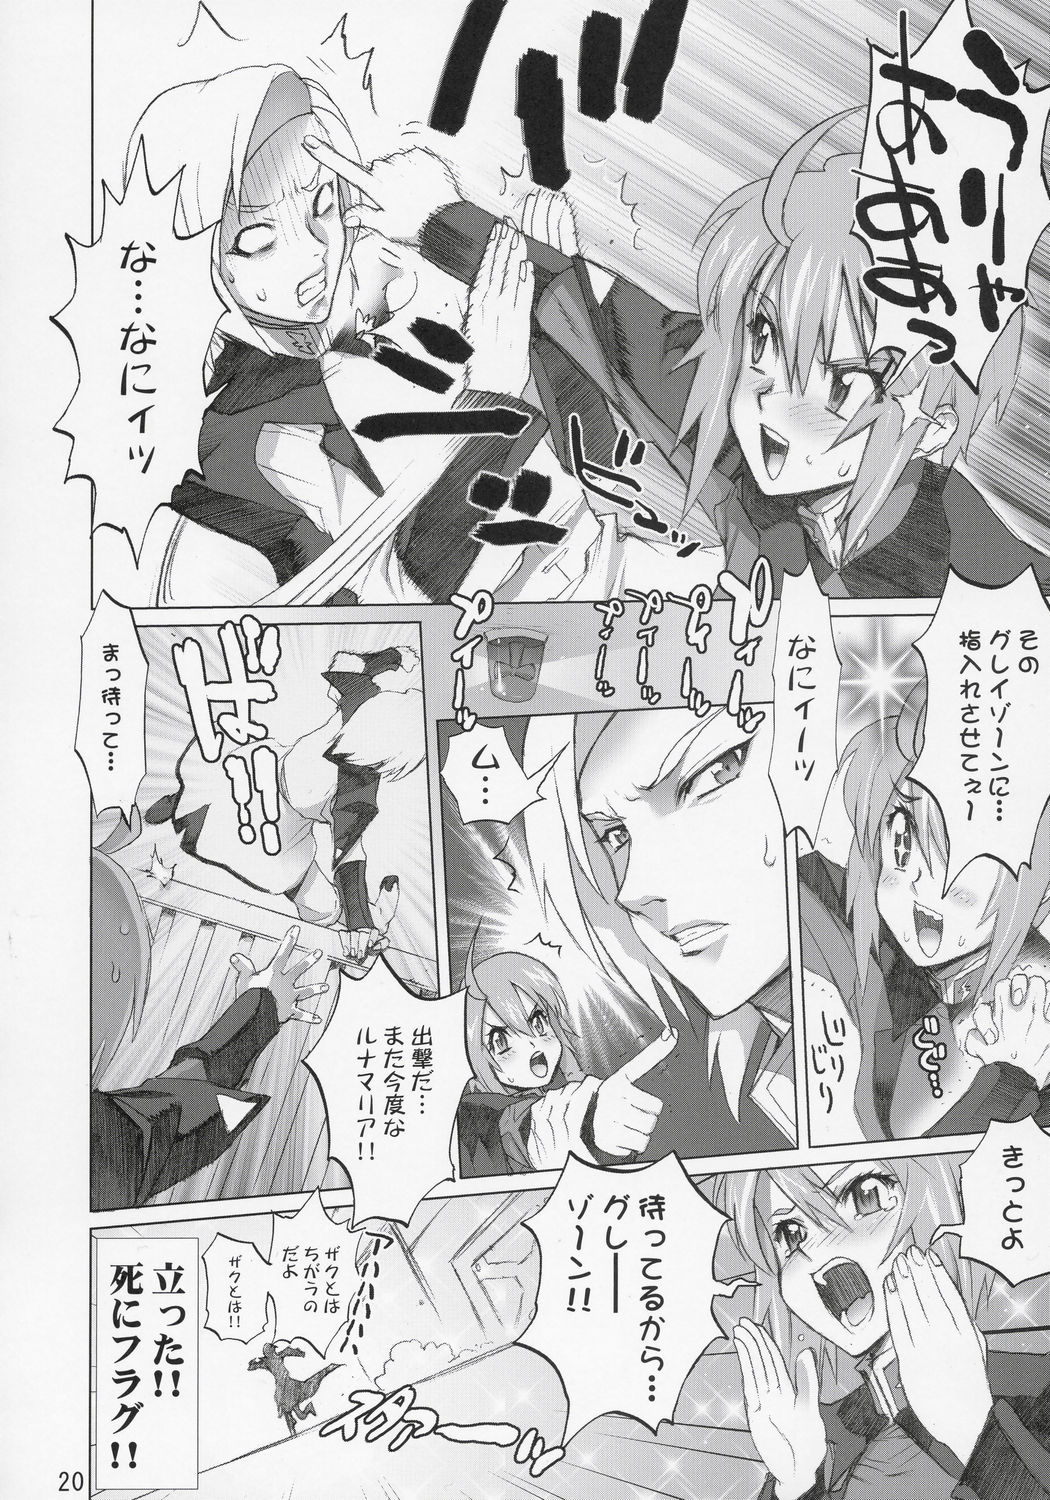 (C69) [Digital Accel Works] Inazuma Warrior 2 (Various) page 19 full